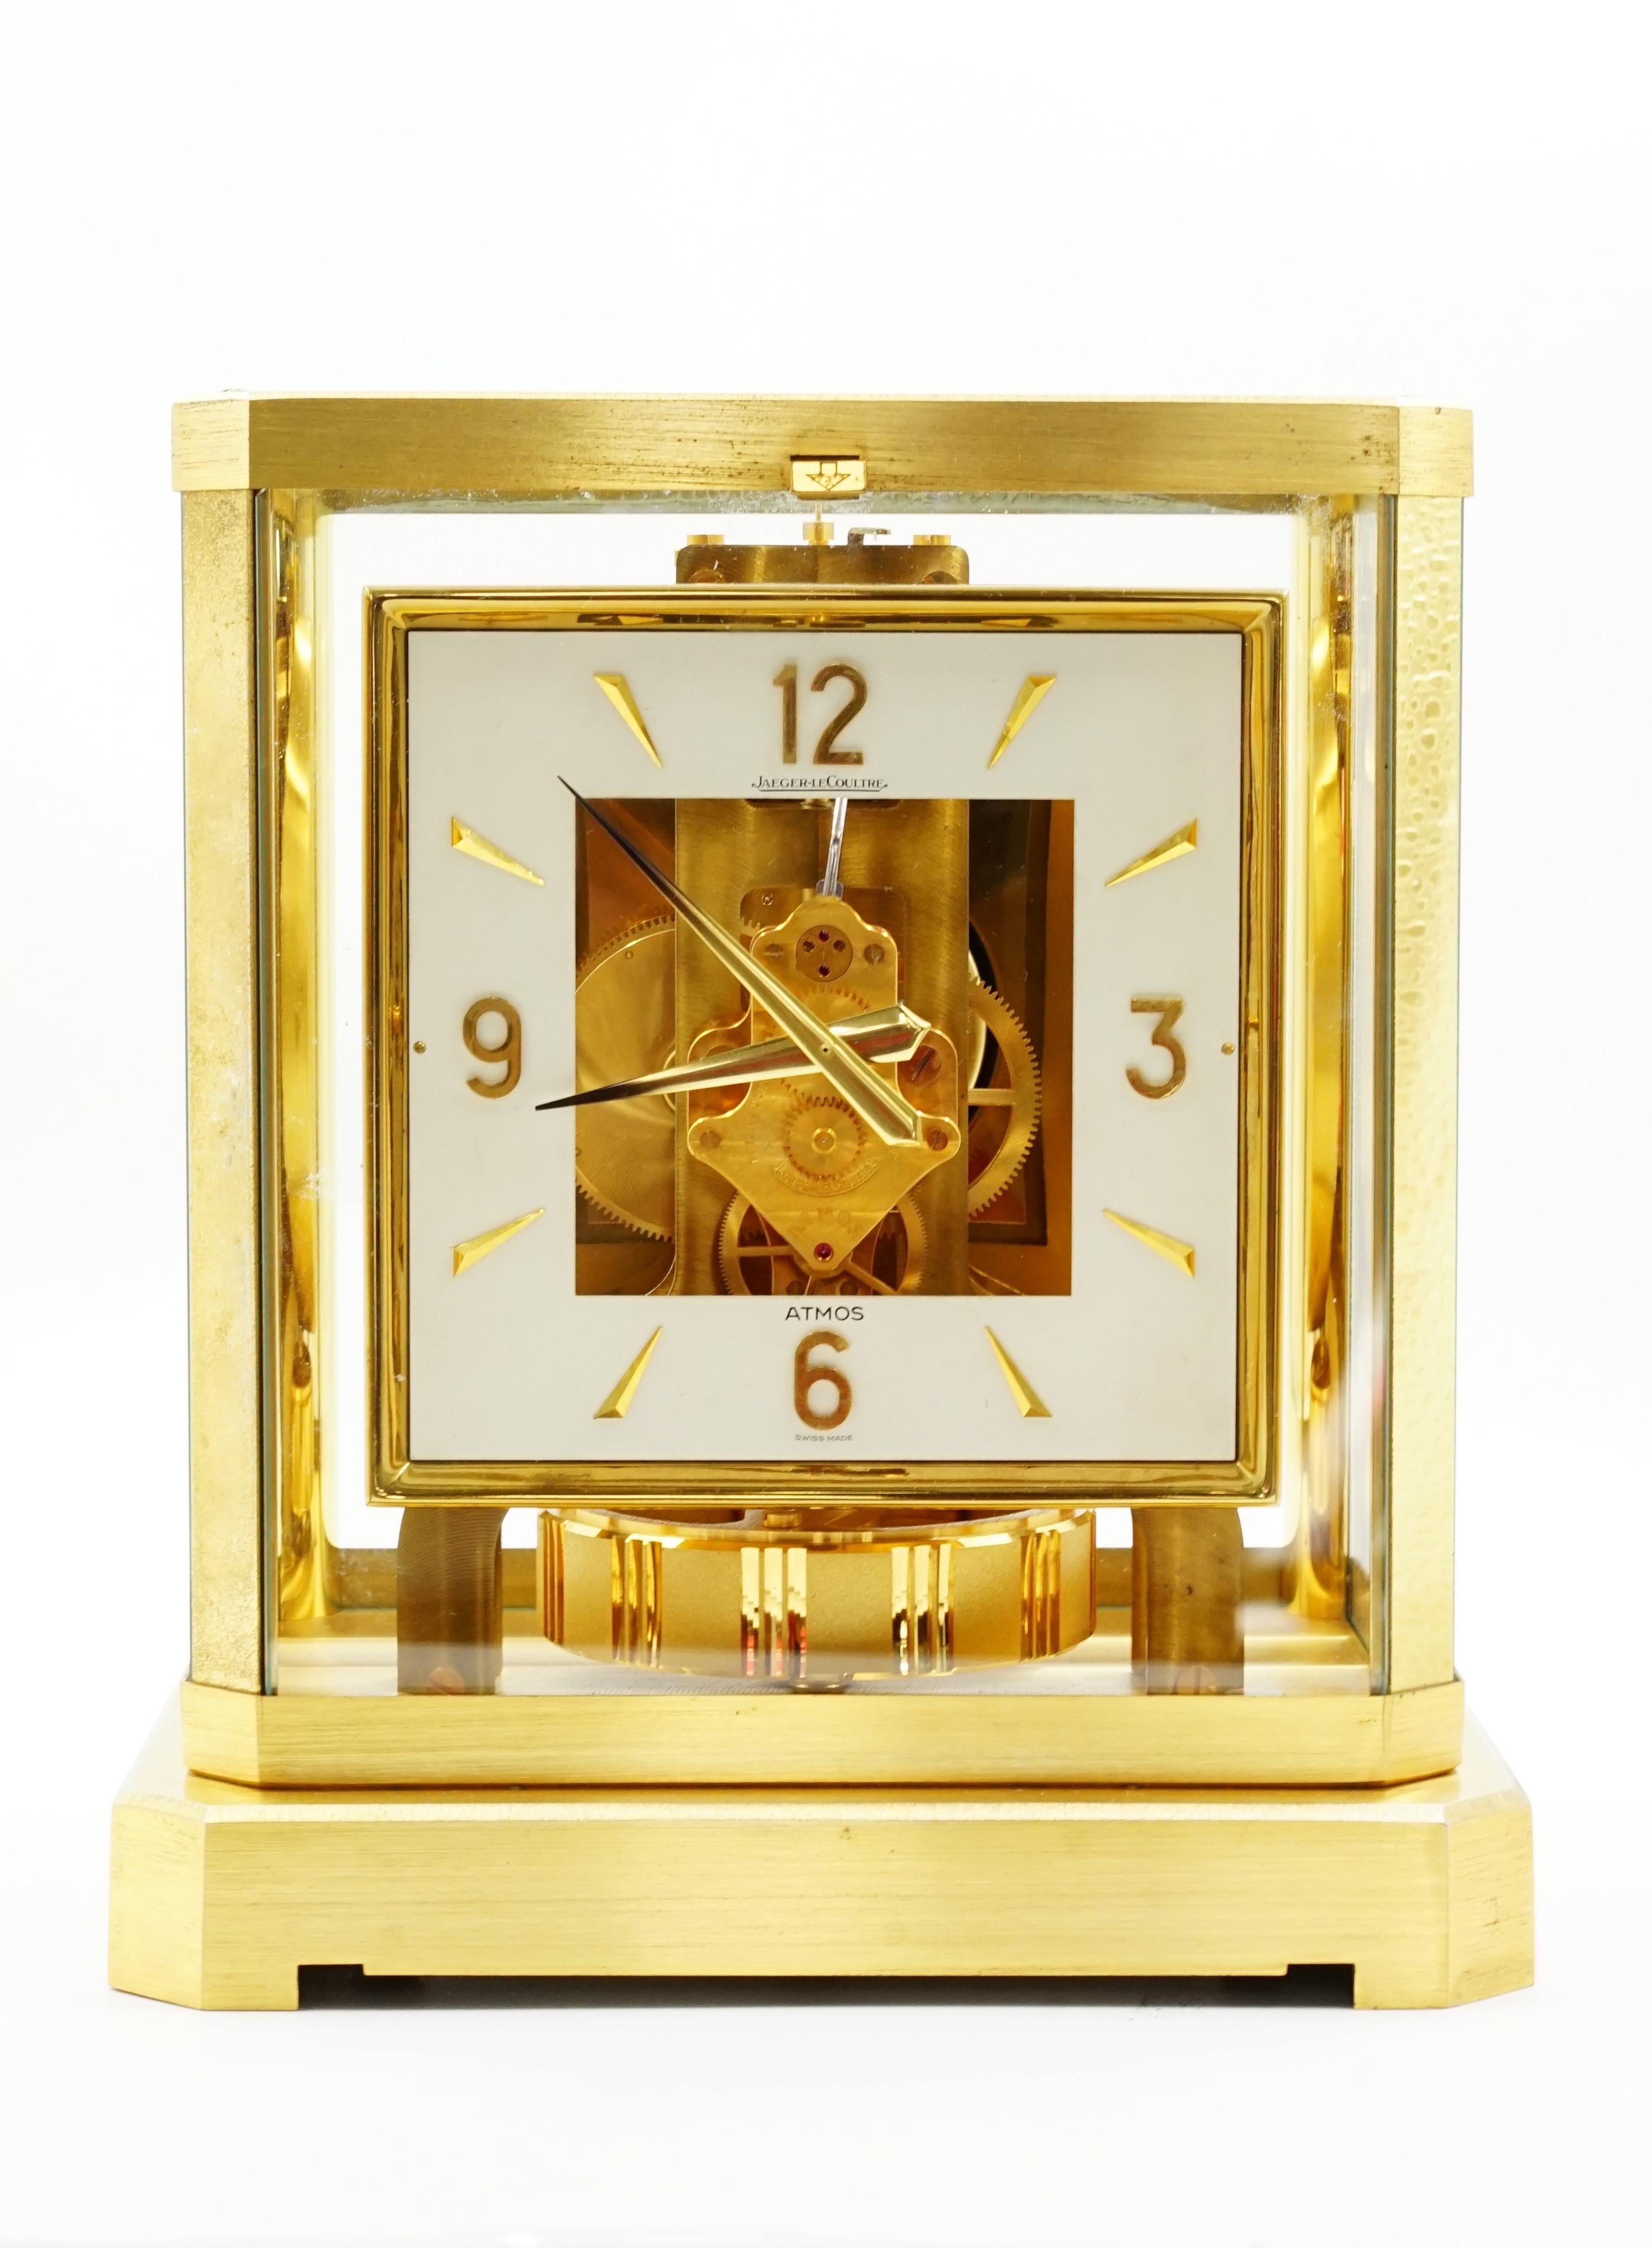 Jaeger Lecoultre Atmos Watch
Atmos VI
Table clock It works correctly. perpetual motion
It has caliber 528 (1958-1968)
The dial is square
Materials Bronze and glass
The patina is golden and has some minor natural wear.
Origin Switzerland Circa